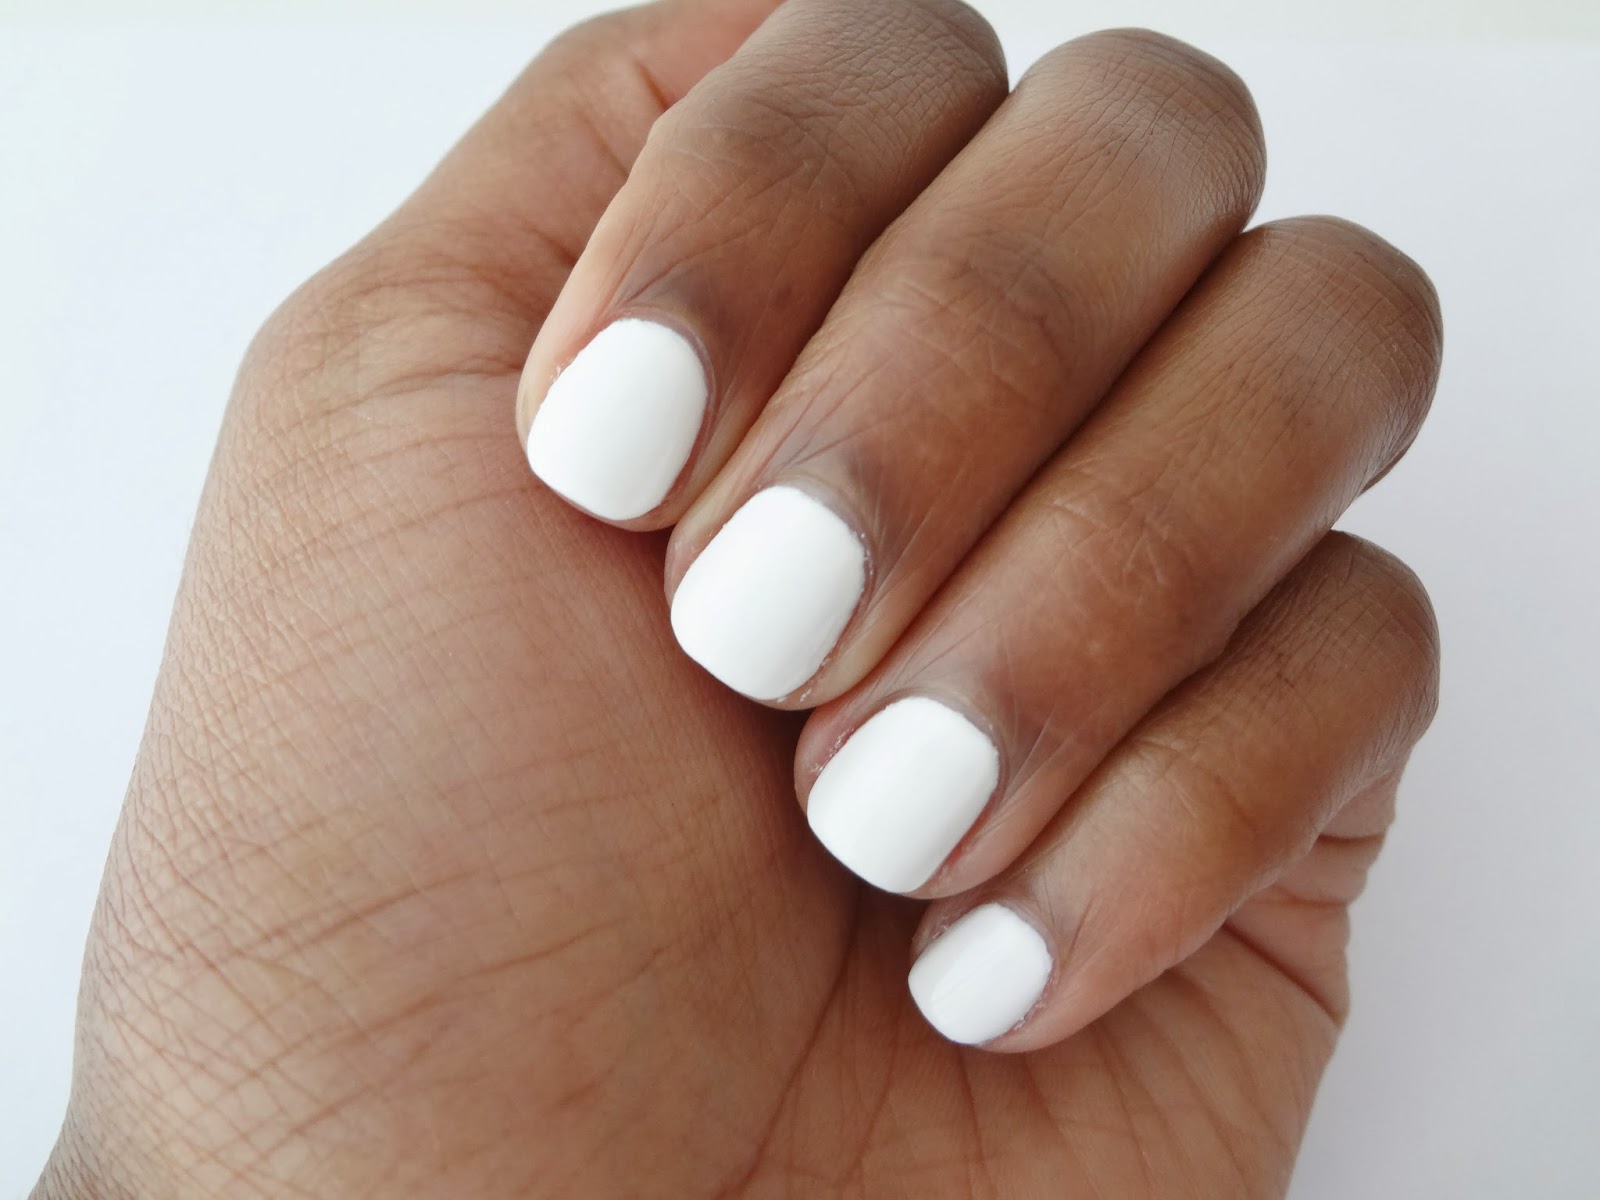 9. OPI Nail Lacquer in "Alpine Snow" - wide 4